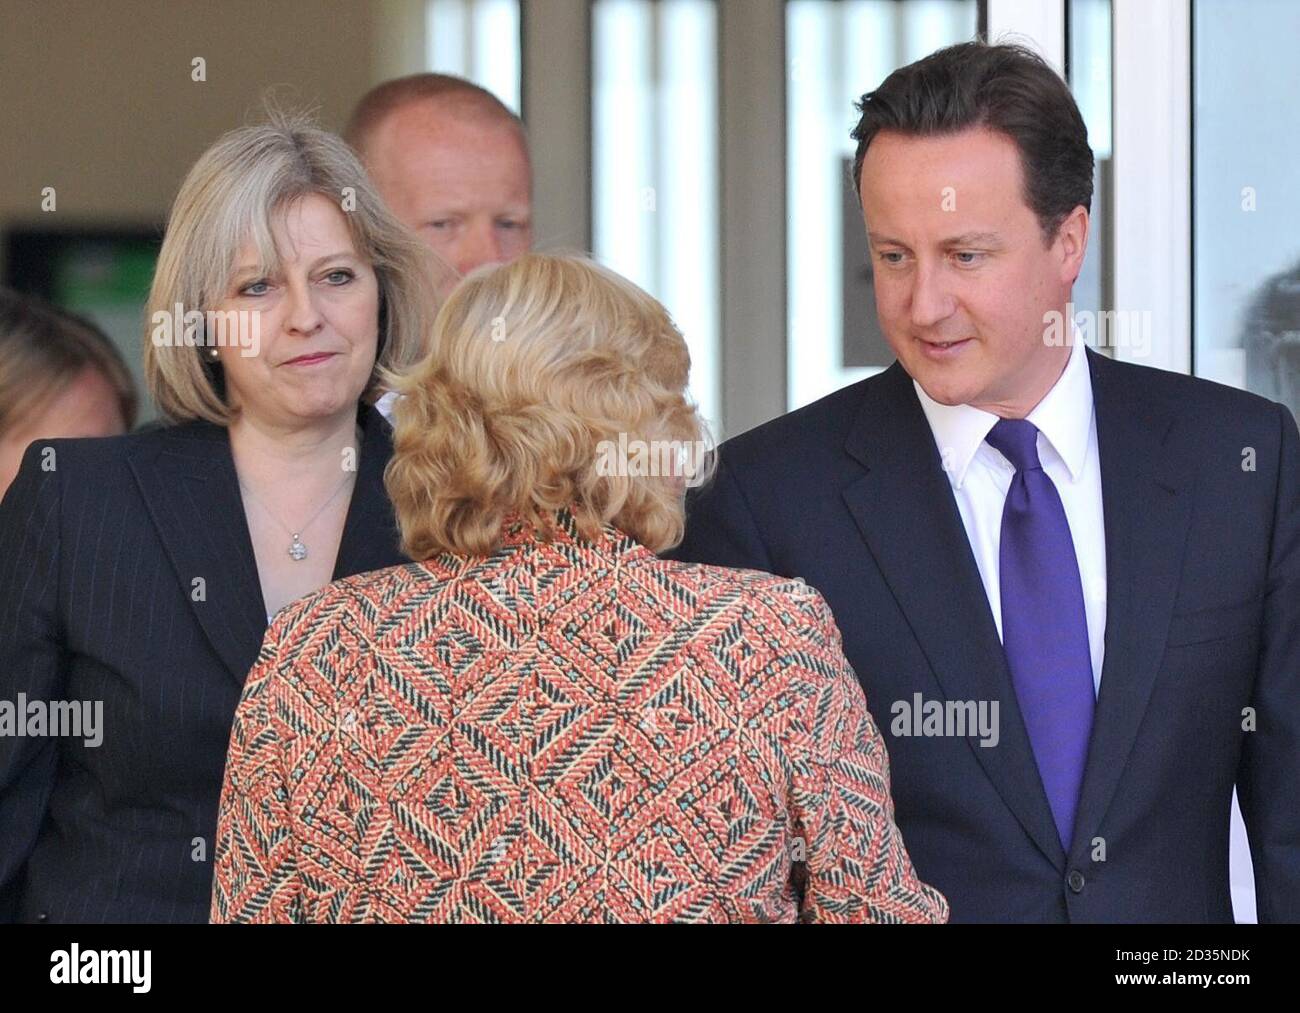 Prime Minister David Cameron and Home Secretary Theresa May leave the West Cumberland Hospital, Whitehaven, Cumbria. The Prime Minister visited Cumbria today to meet survivors and emergency services staff caught up in Derrick Bird's shooting rampage. Stock Photo